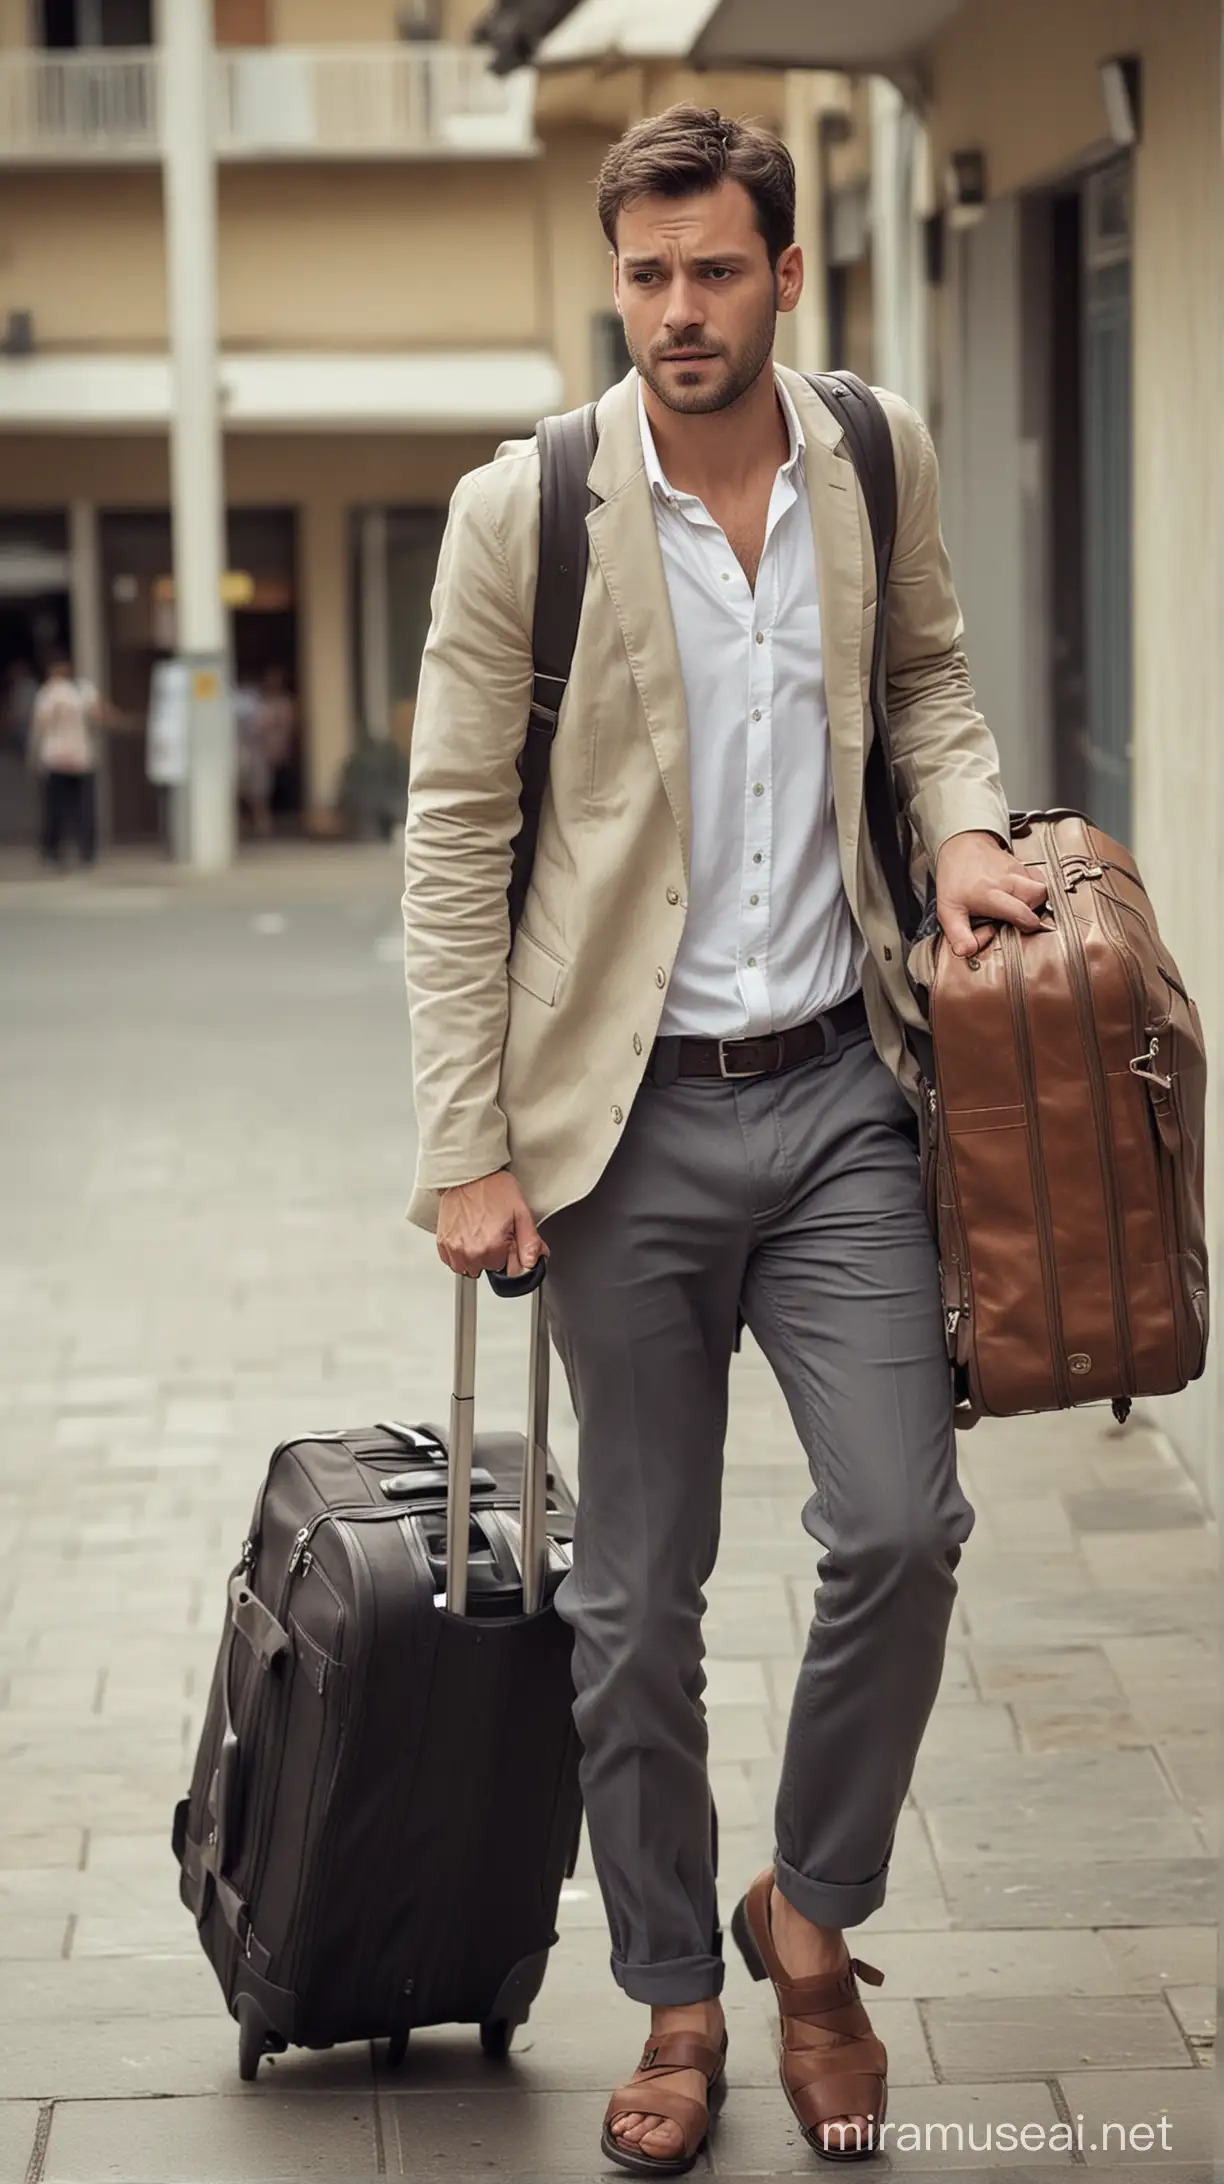 Scene of the man returning from honeymoon: The man is seen returning home with a sad expression, carrying his luggage.
